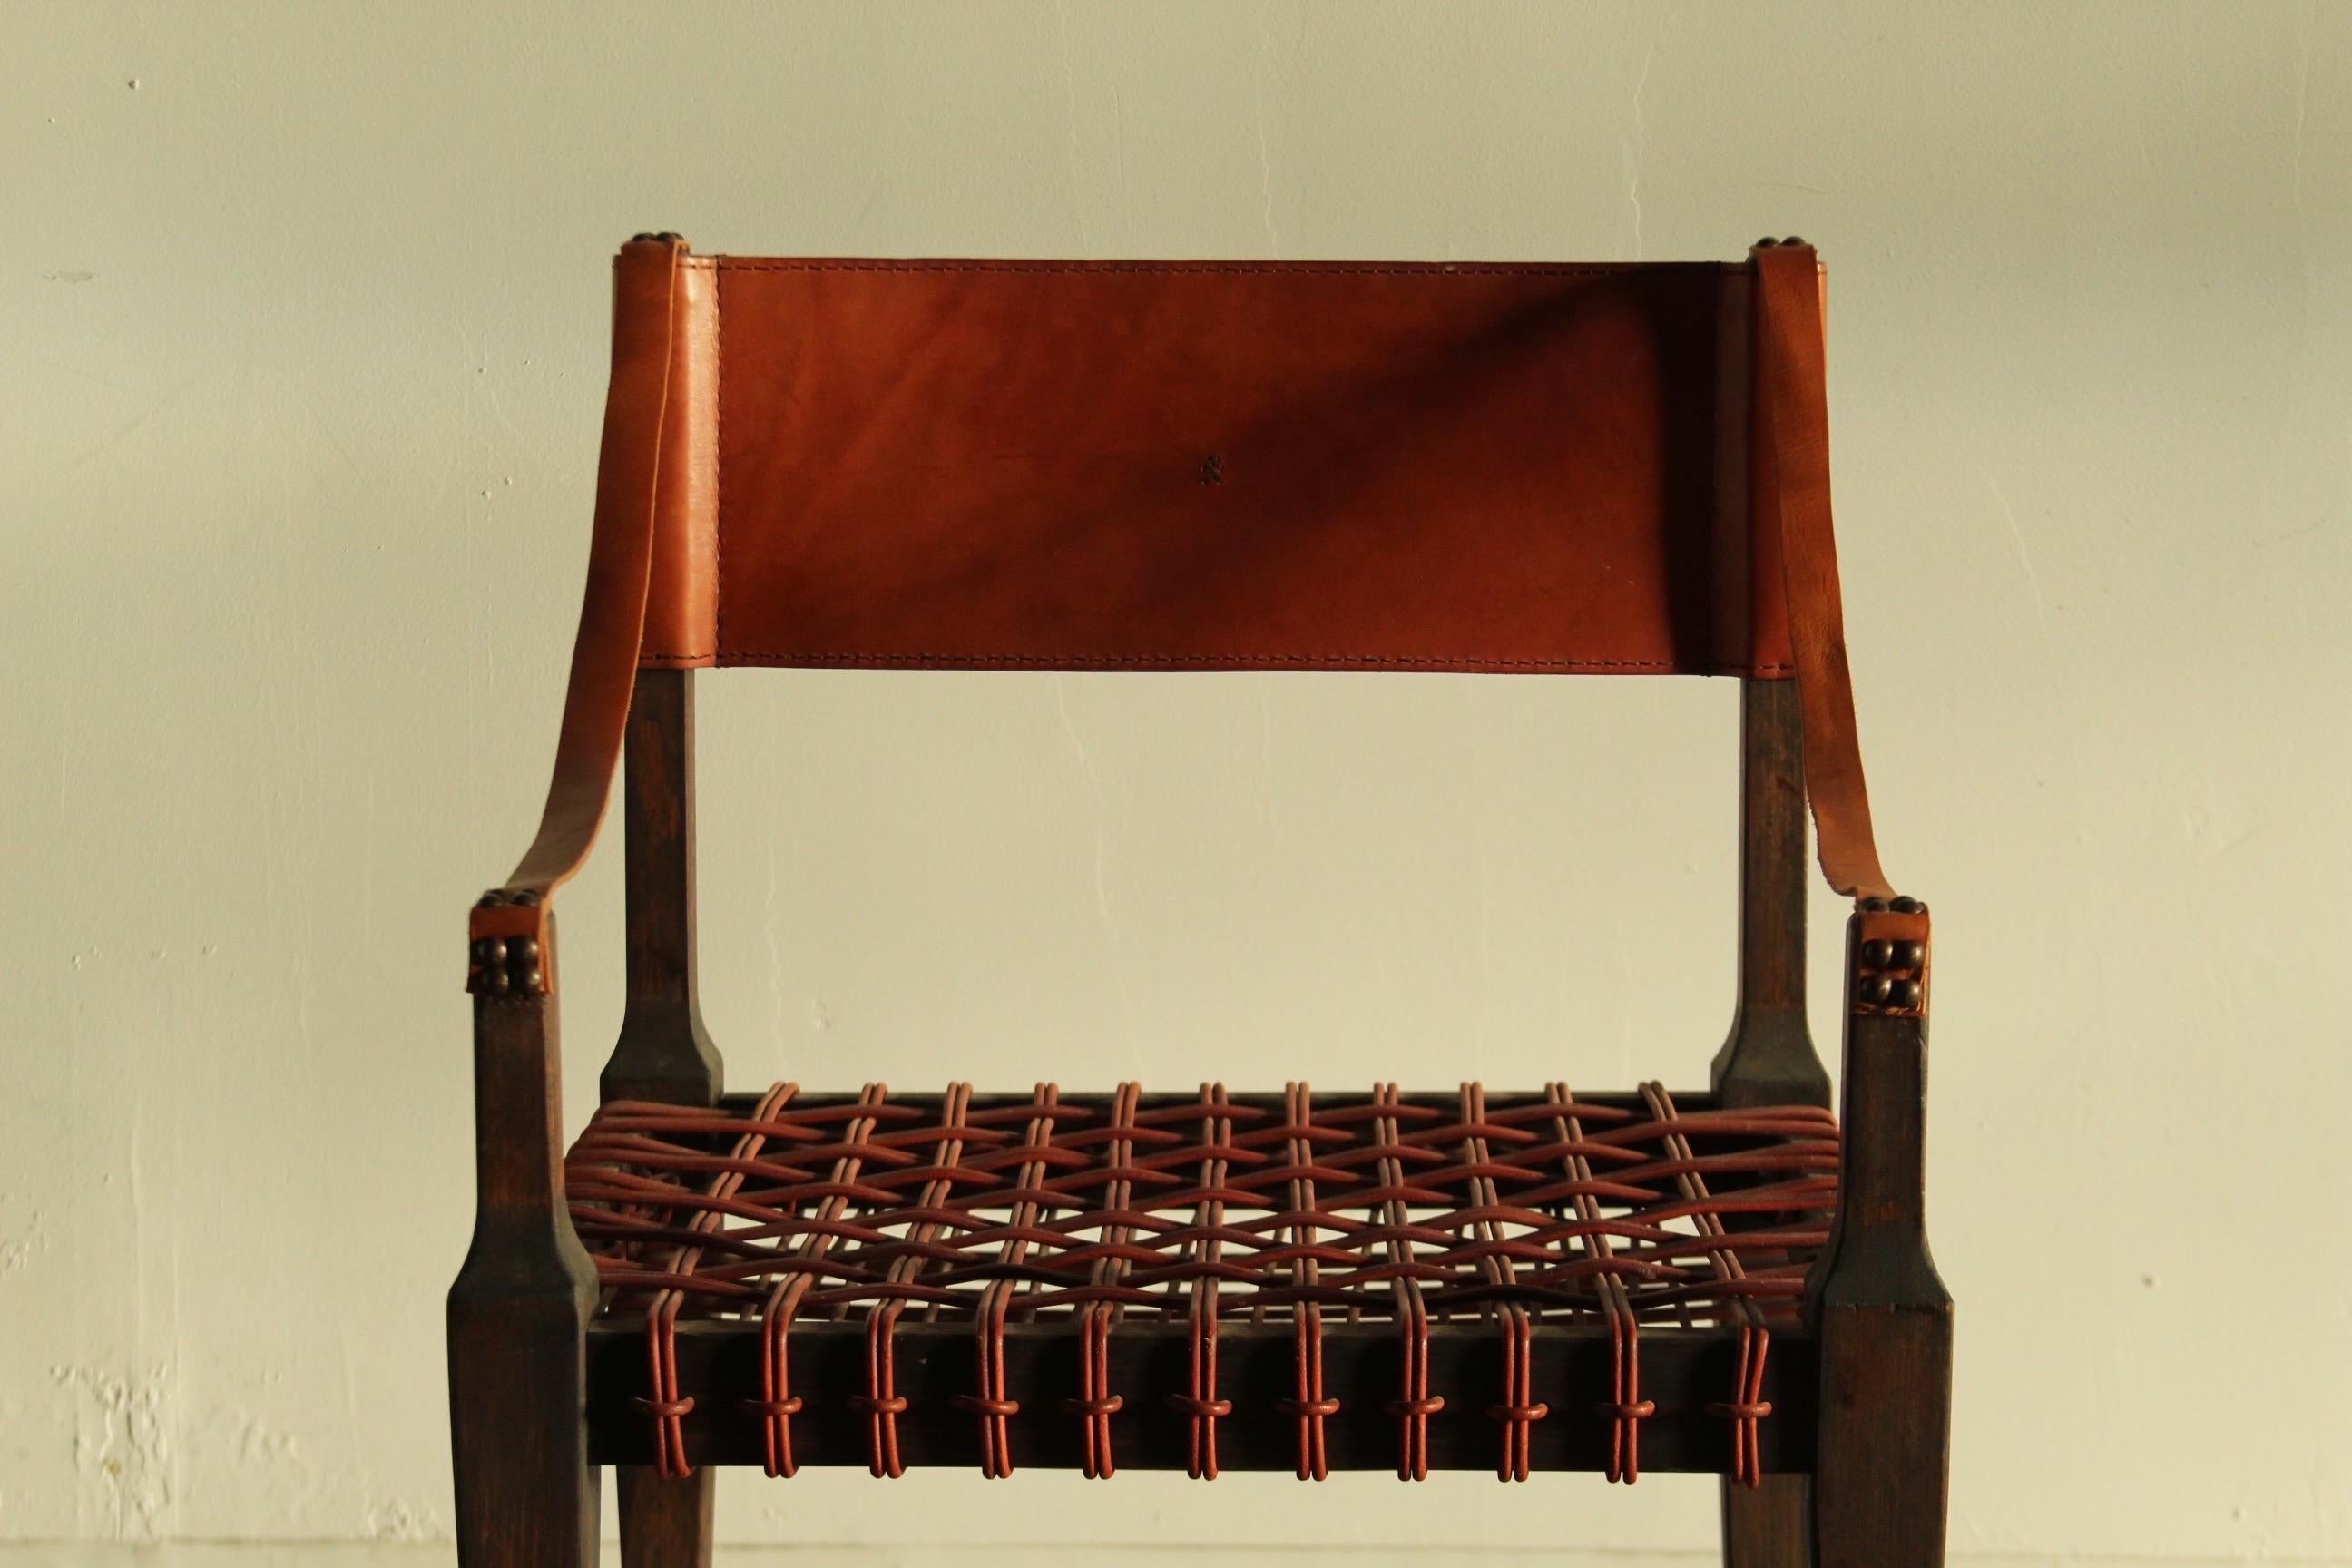 A stunning and rare, vintage armchair by Henry Beguelin in gorgeous whiskey colored leather. Thick leather back support with small woven bear detail. Thin slung leather strap arms. Woven leather cord seat. Tapered legs. Super regal from every angle,